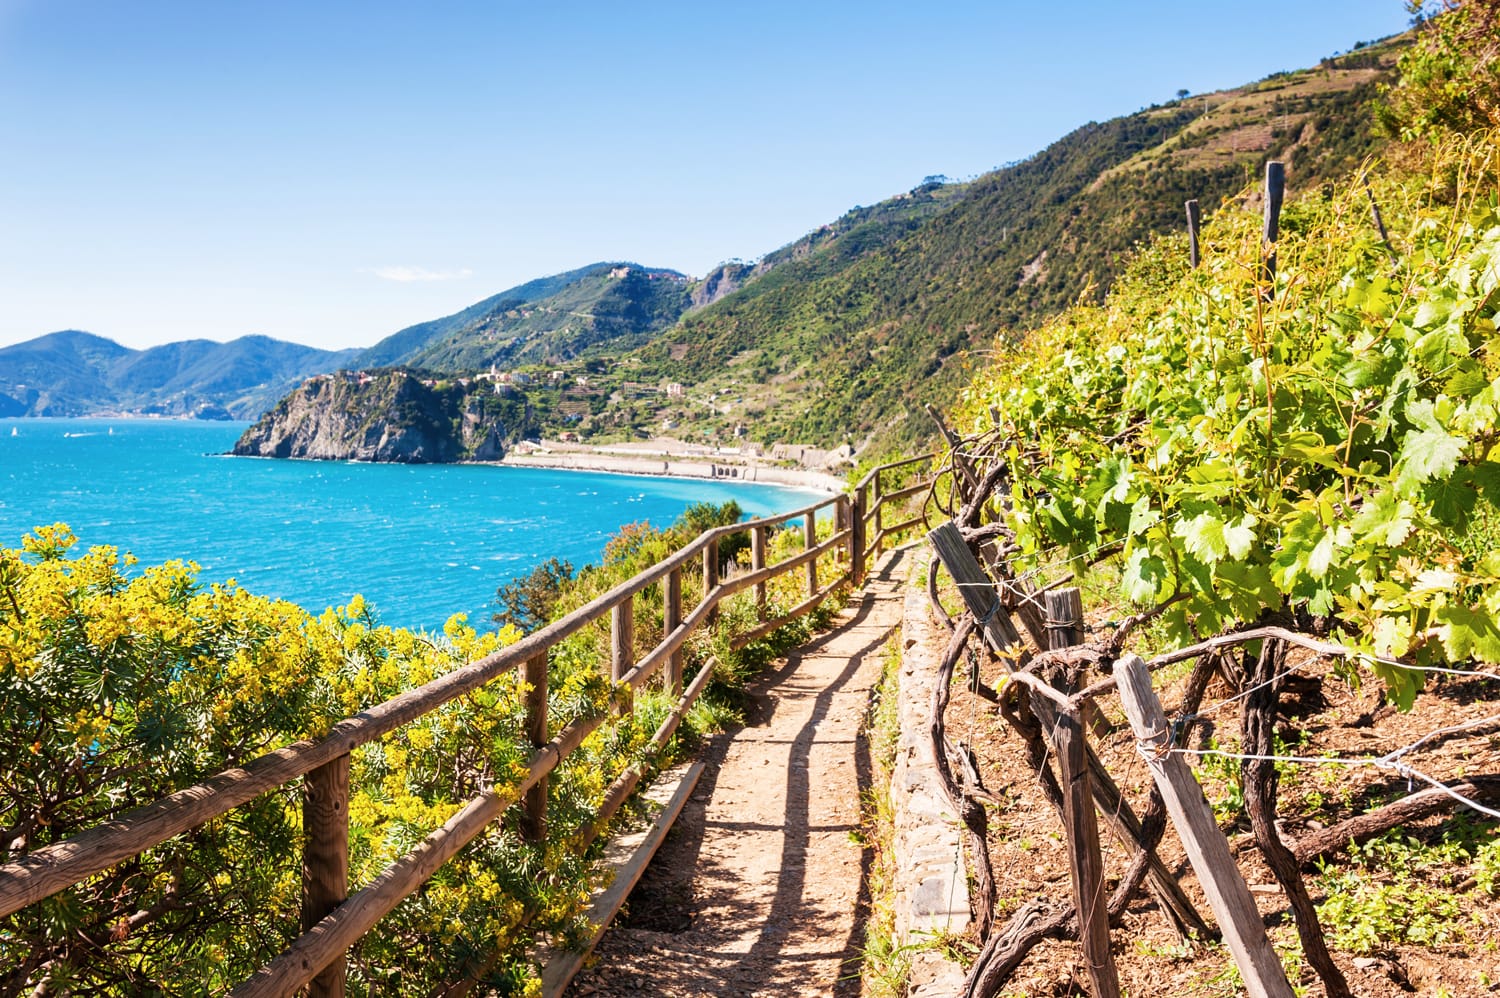 Beautiful view of the vineyards, sea and mountains. Cinque Terre, Italy.